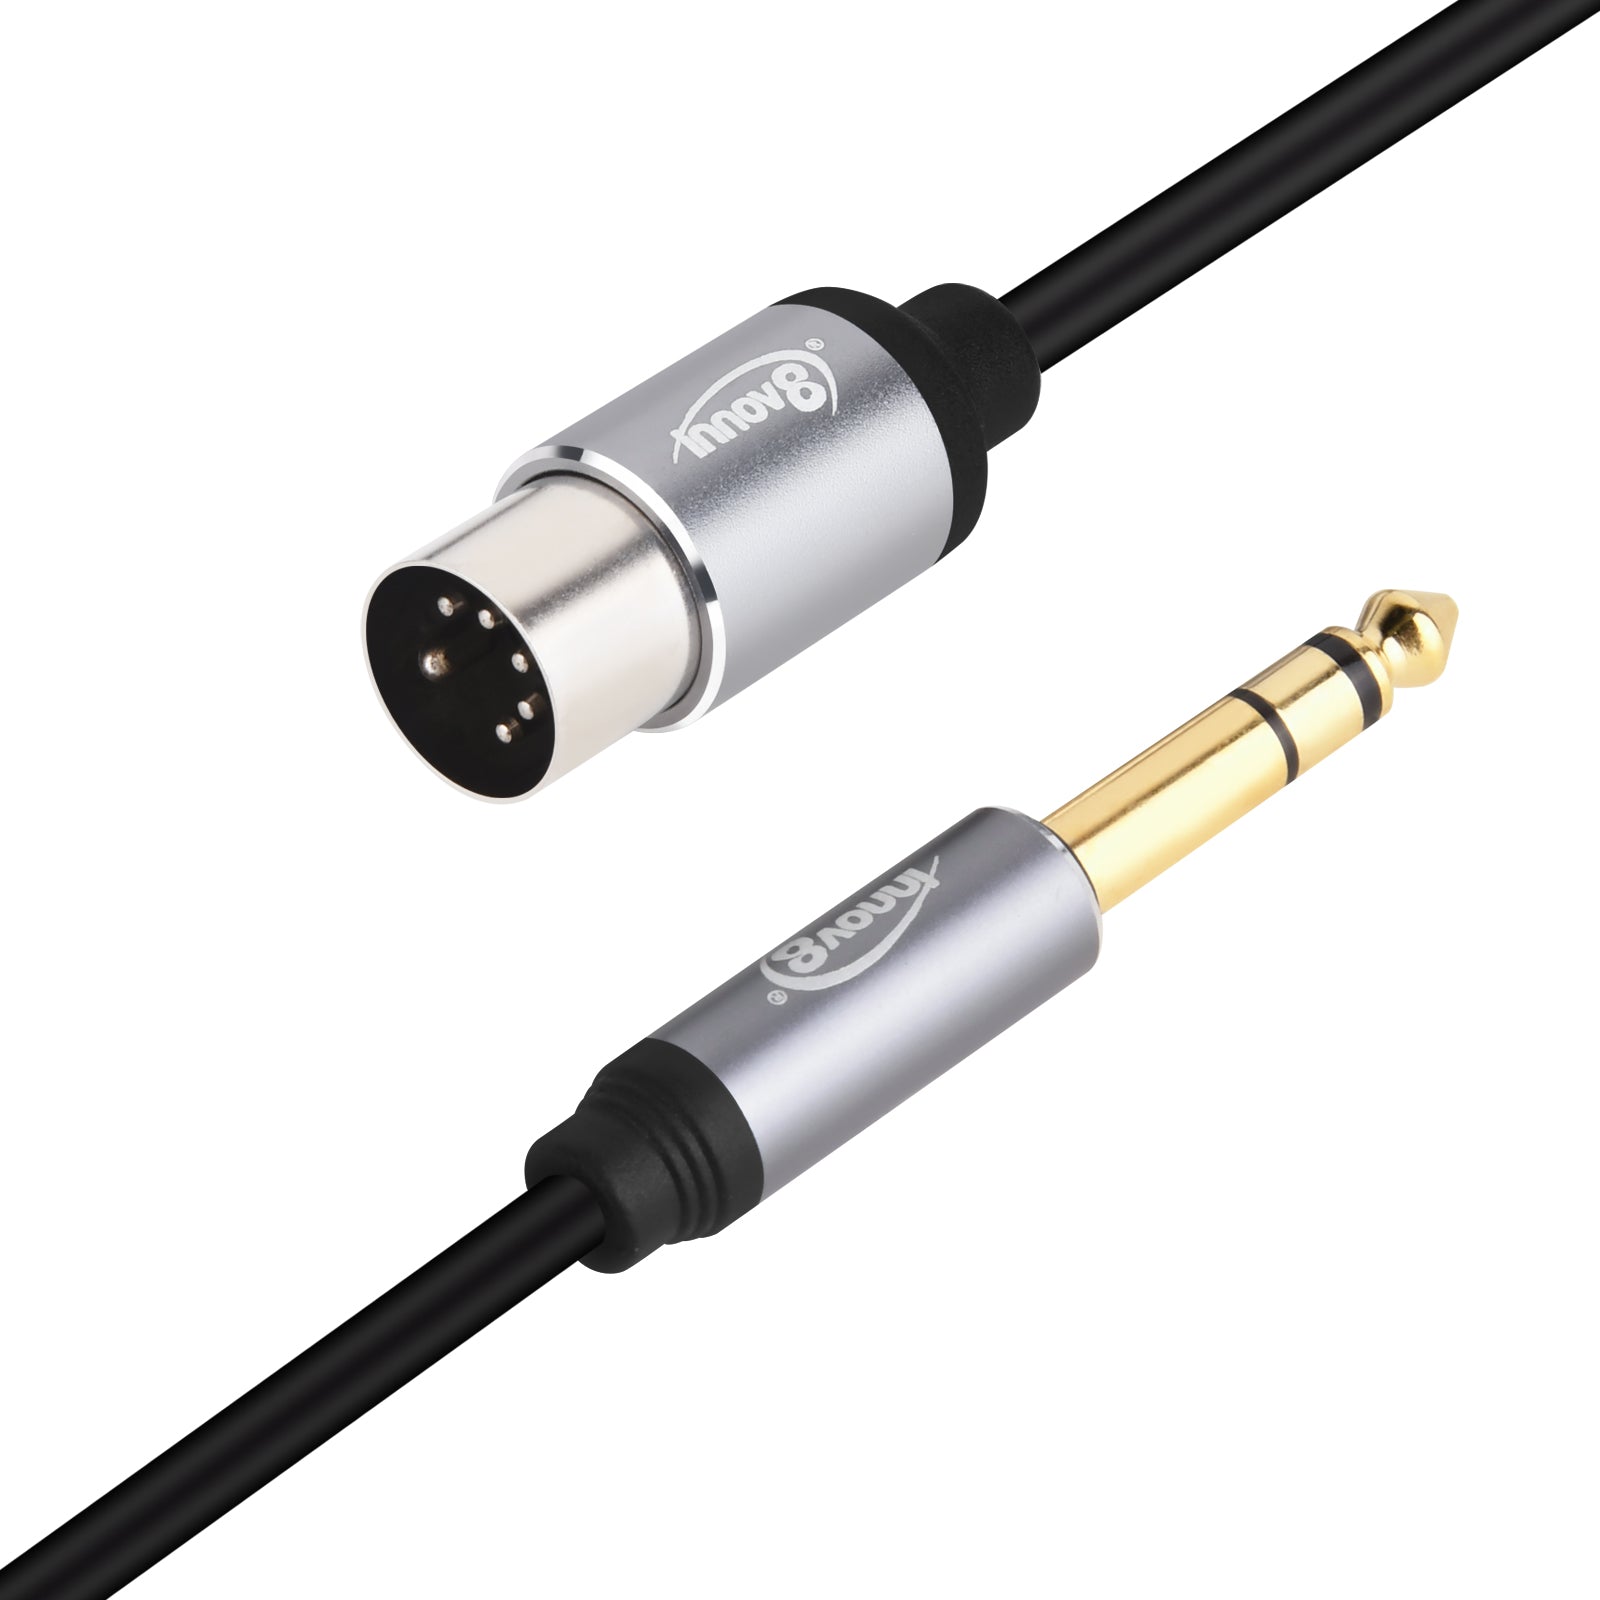 6.35mm (1/4 Inch)TRS Stereo to Din 5 Pin MIDI Male Stereo Audio Cable 1m